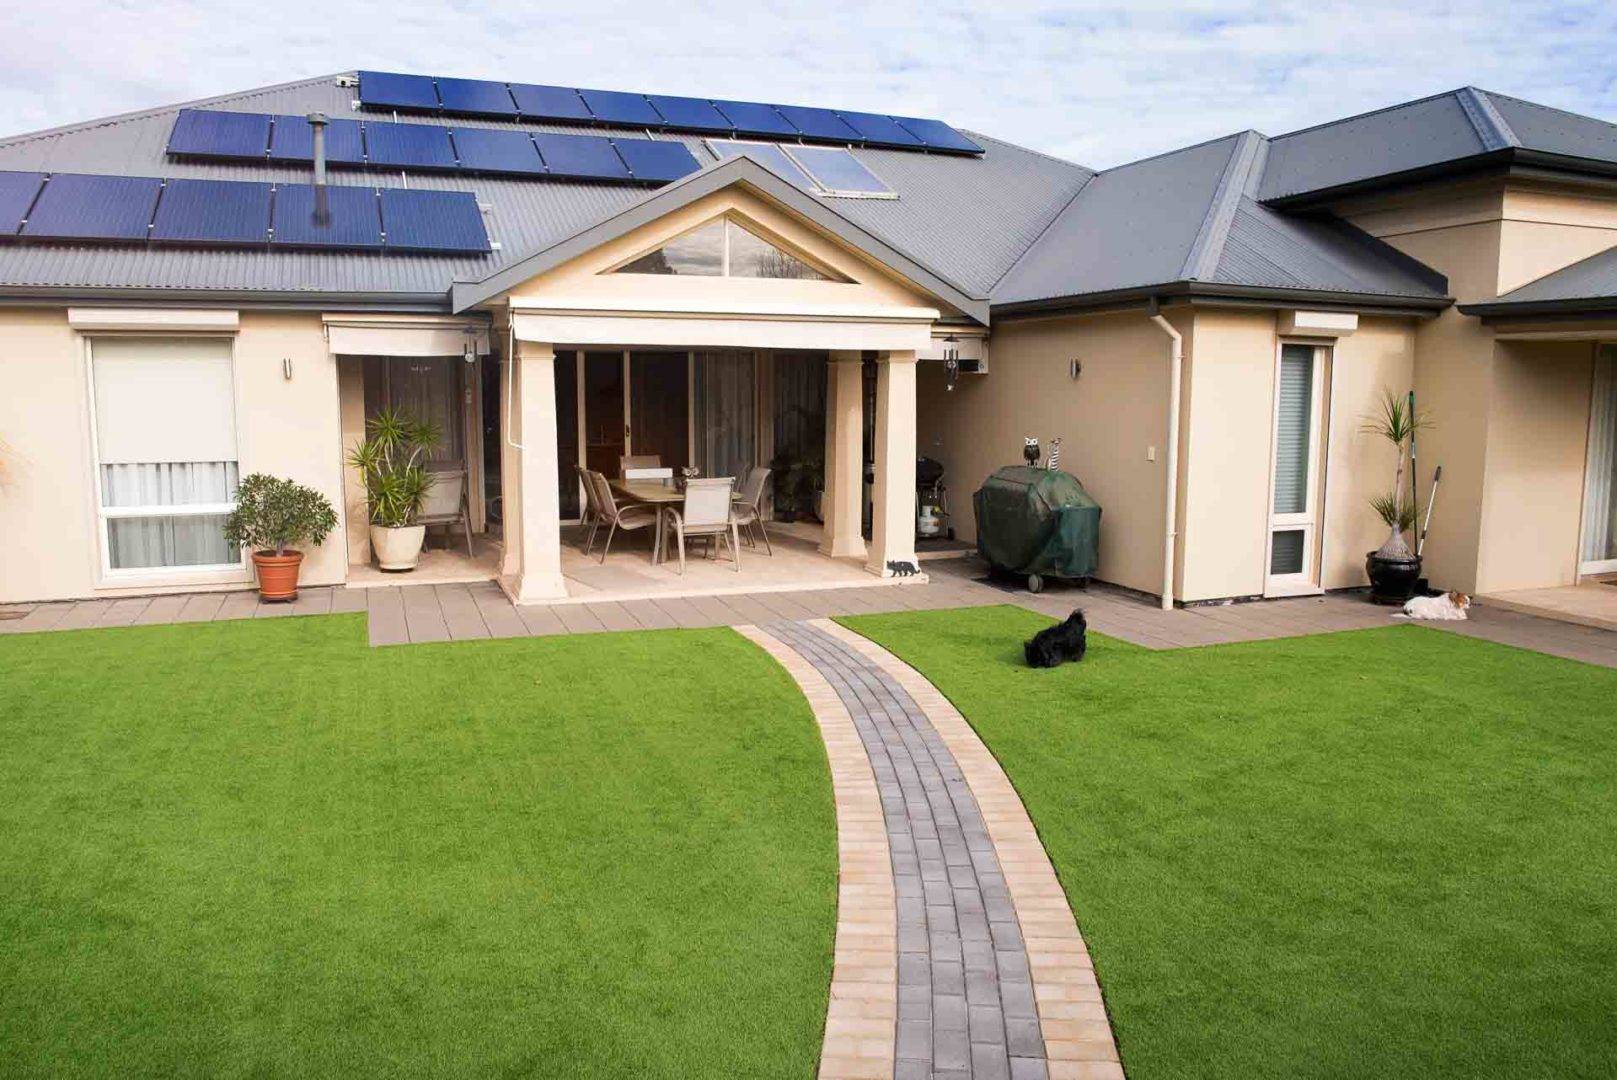 ‘Tis the season… To go on holiday - Law down some Artificial Grass, Australian Outdoor Living.